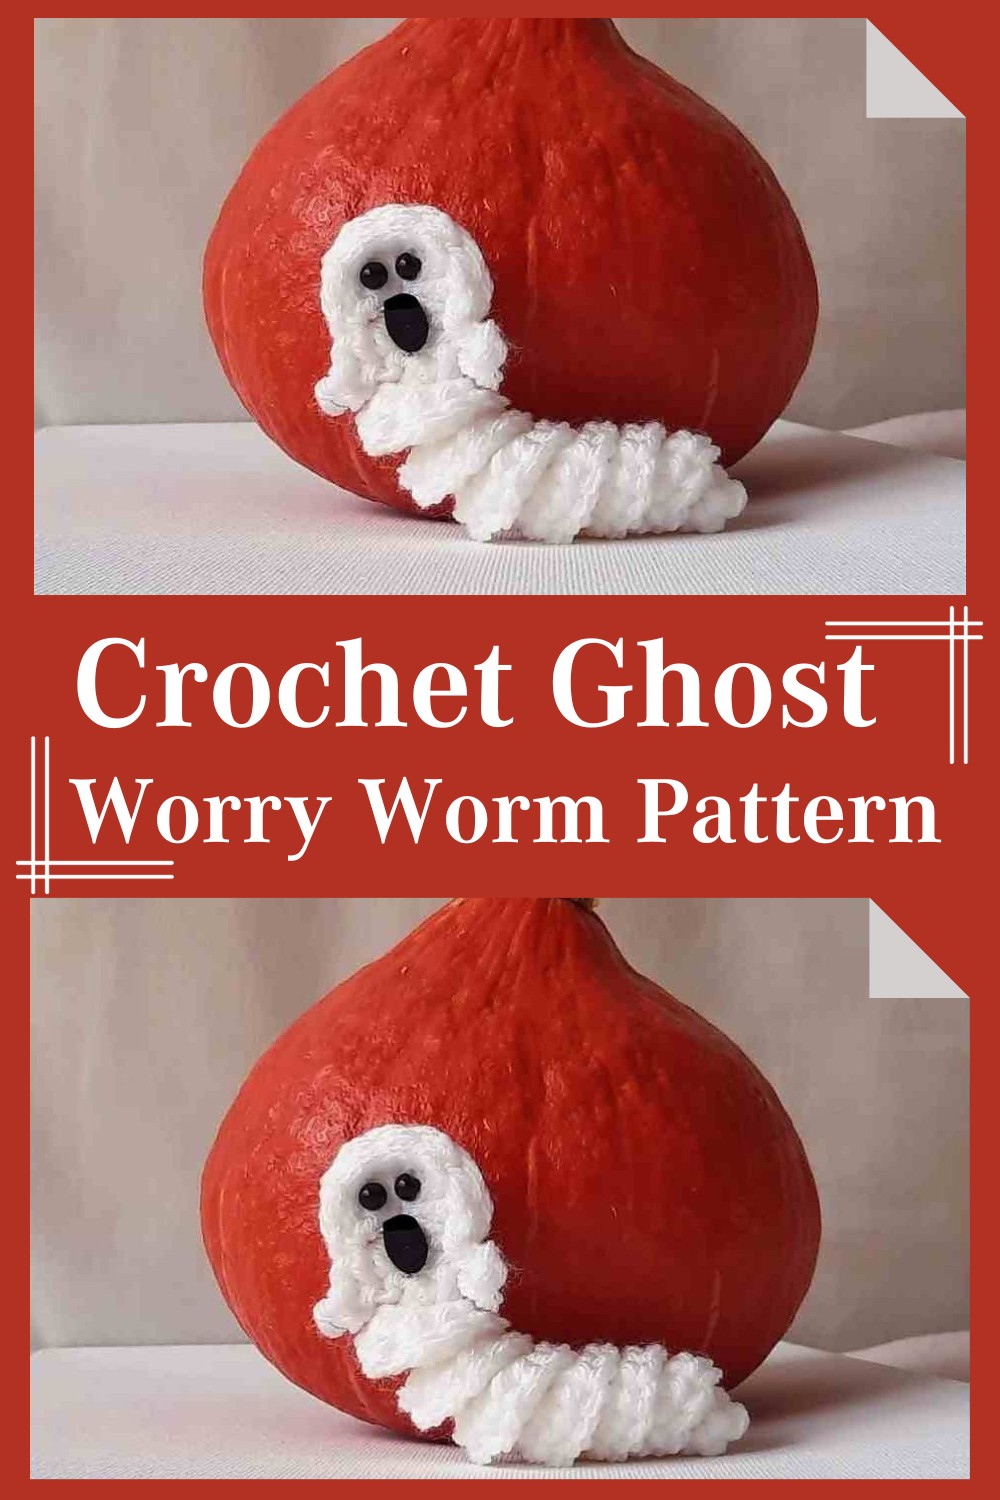 Ghost Worry Worm